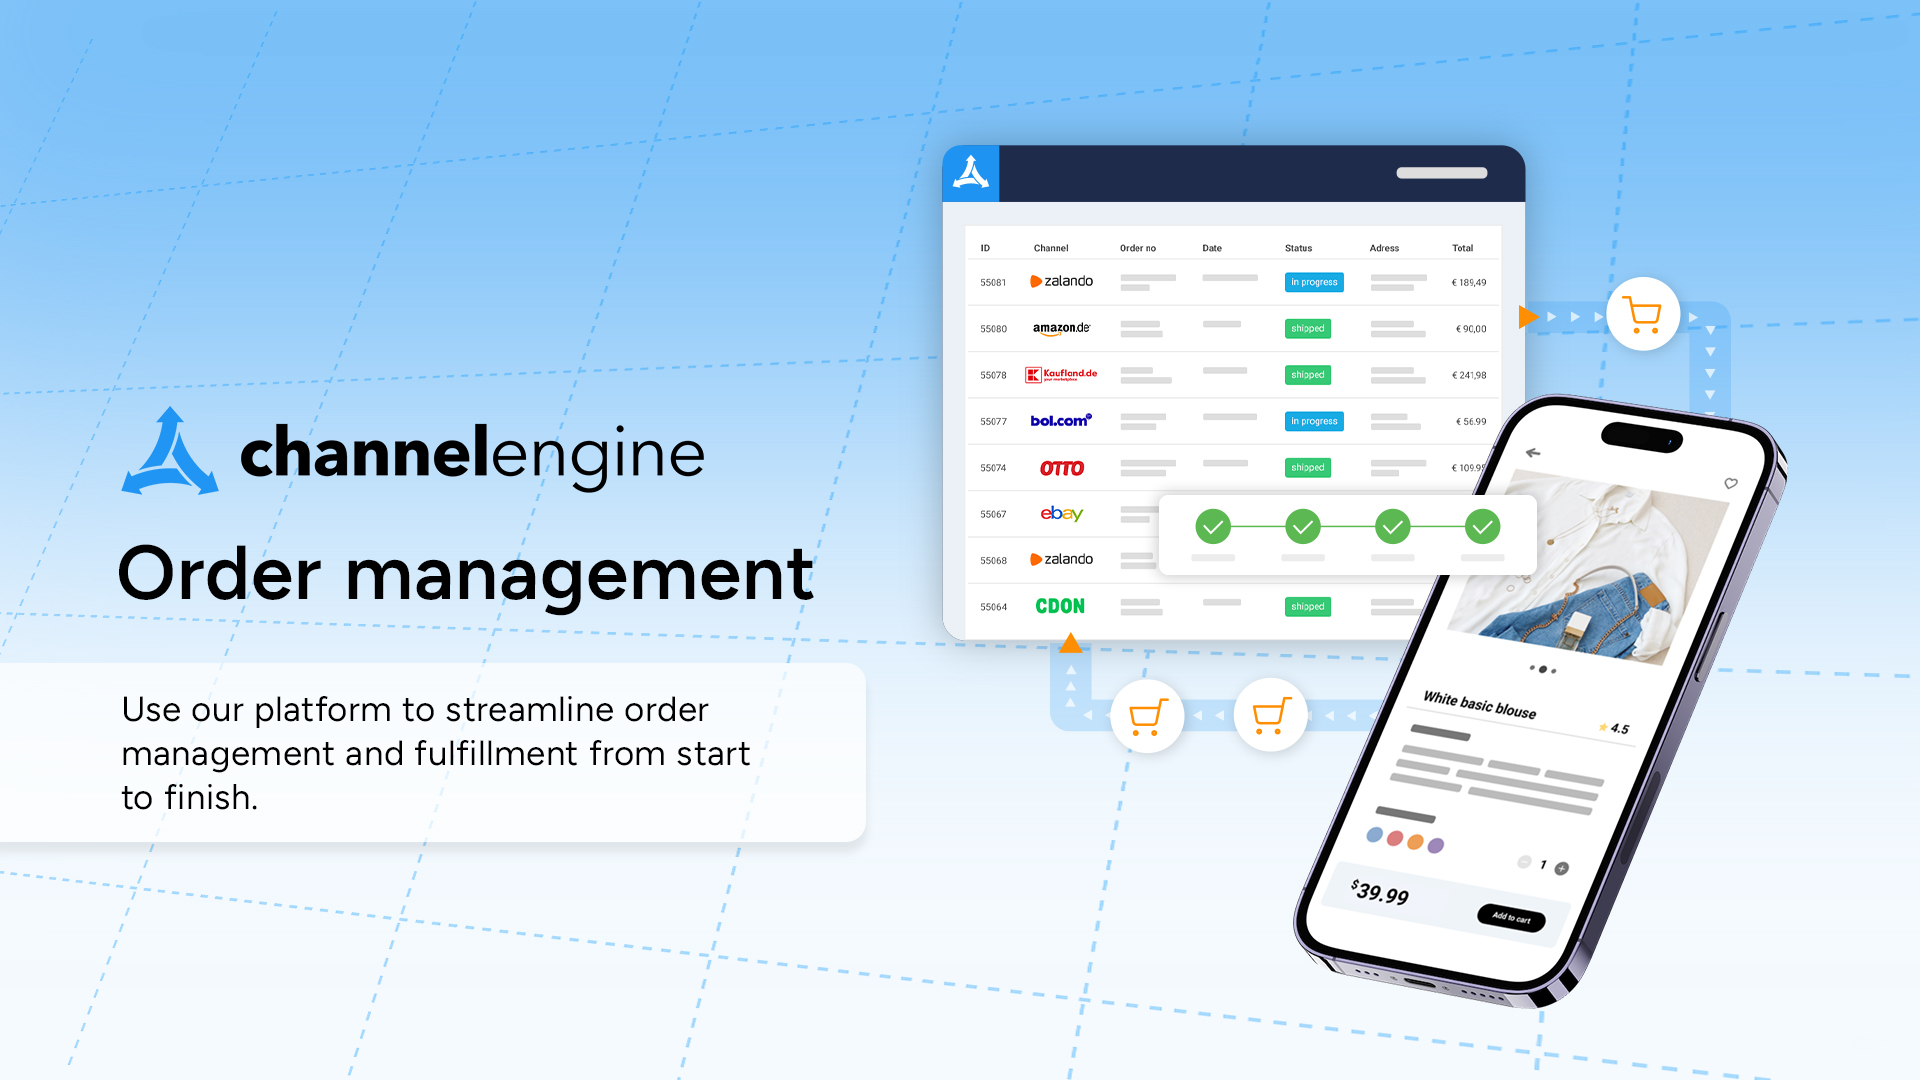 Use our platform to streamline order management and fulfillment from start to finish.